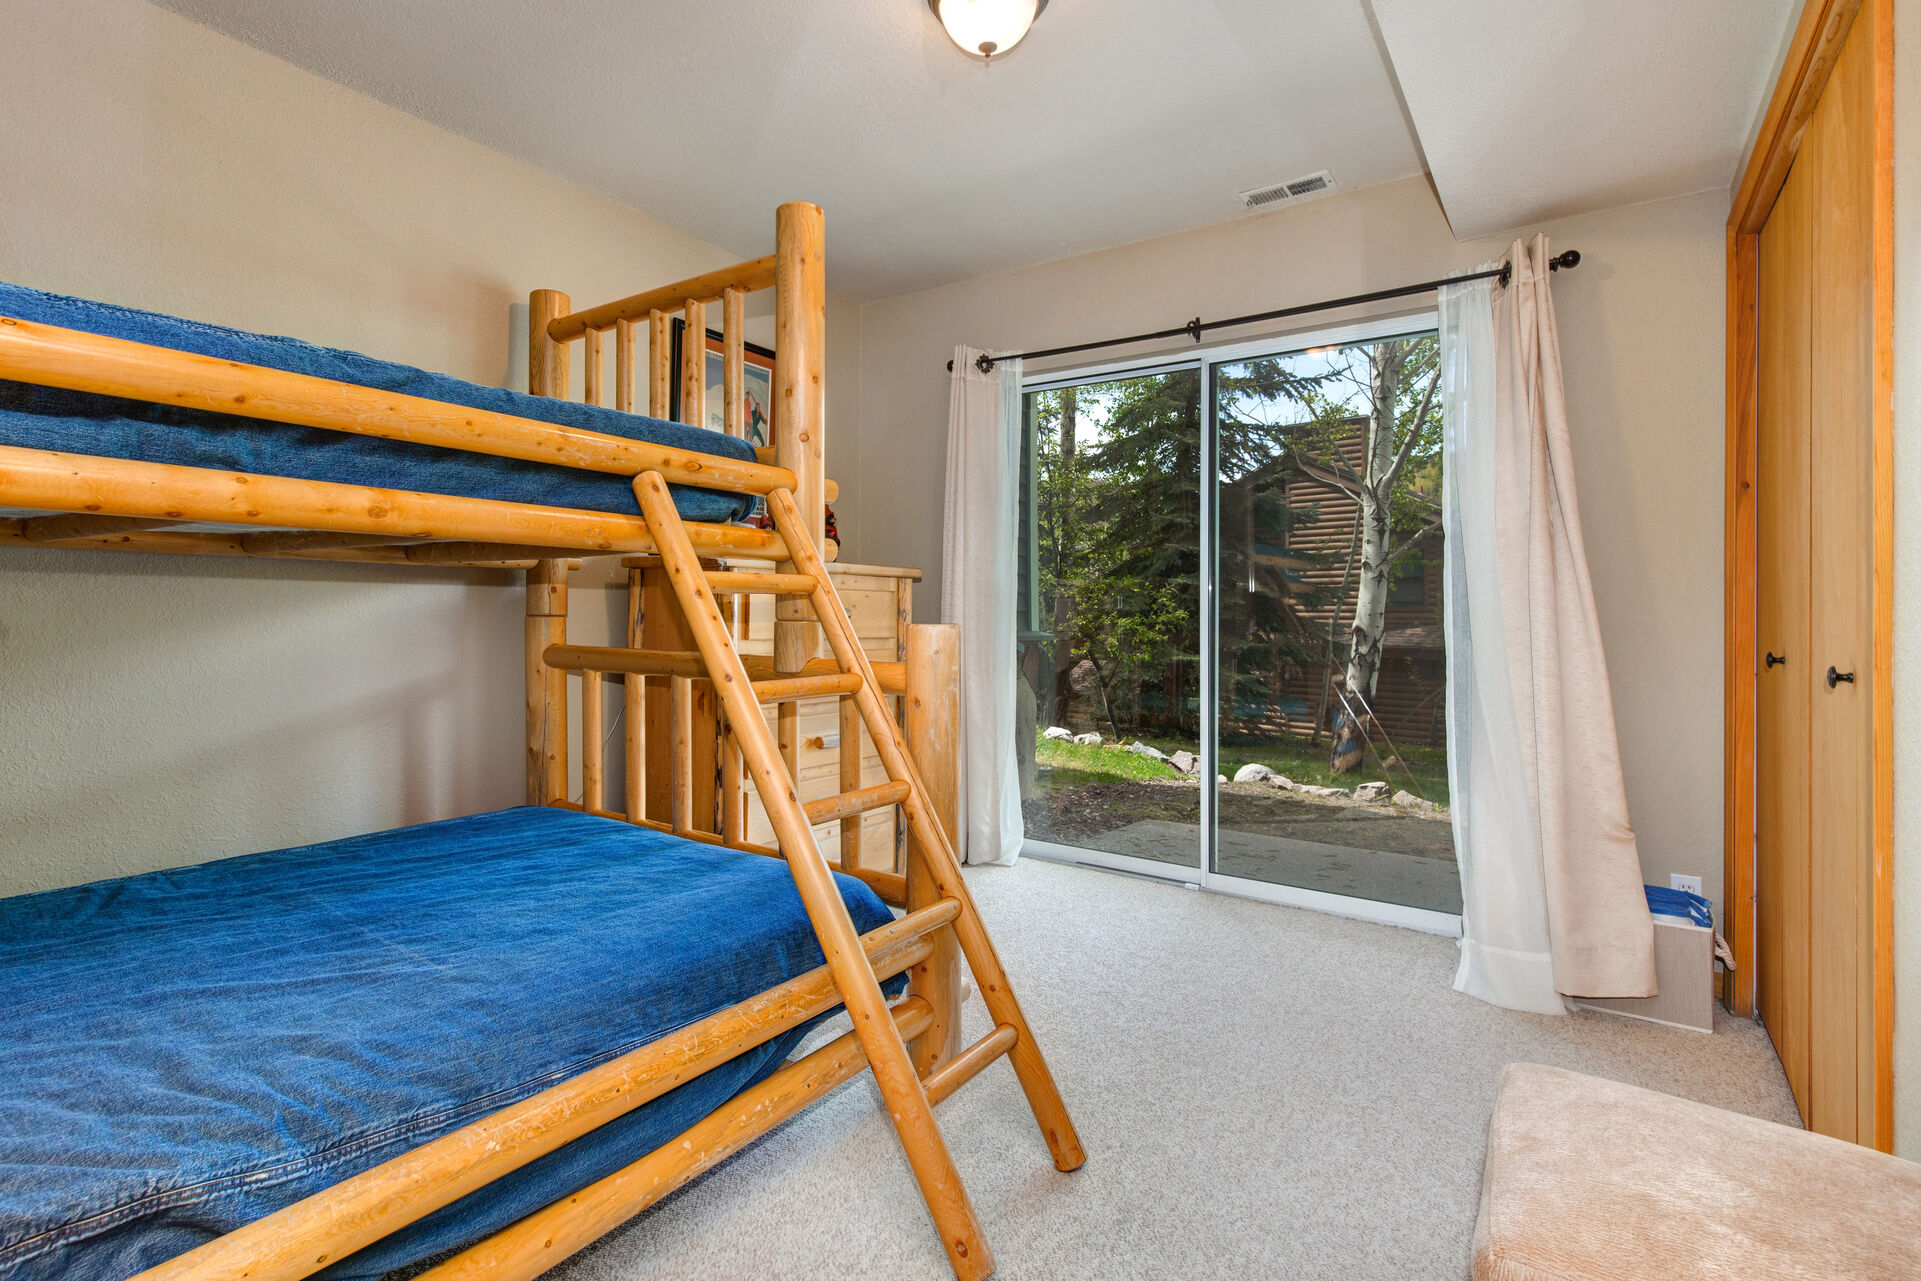 Lower Level Bedroom 2 Bunk Room with twin over full bunkbed, hot tub patio access, and en suite bathroom